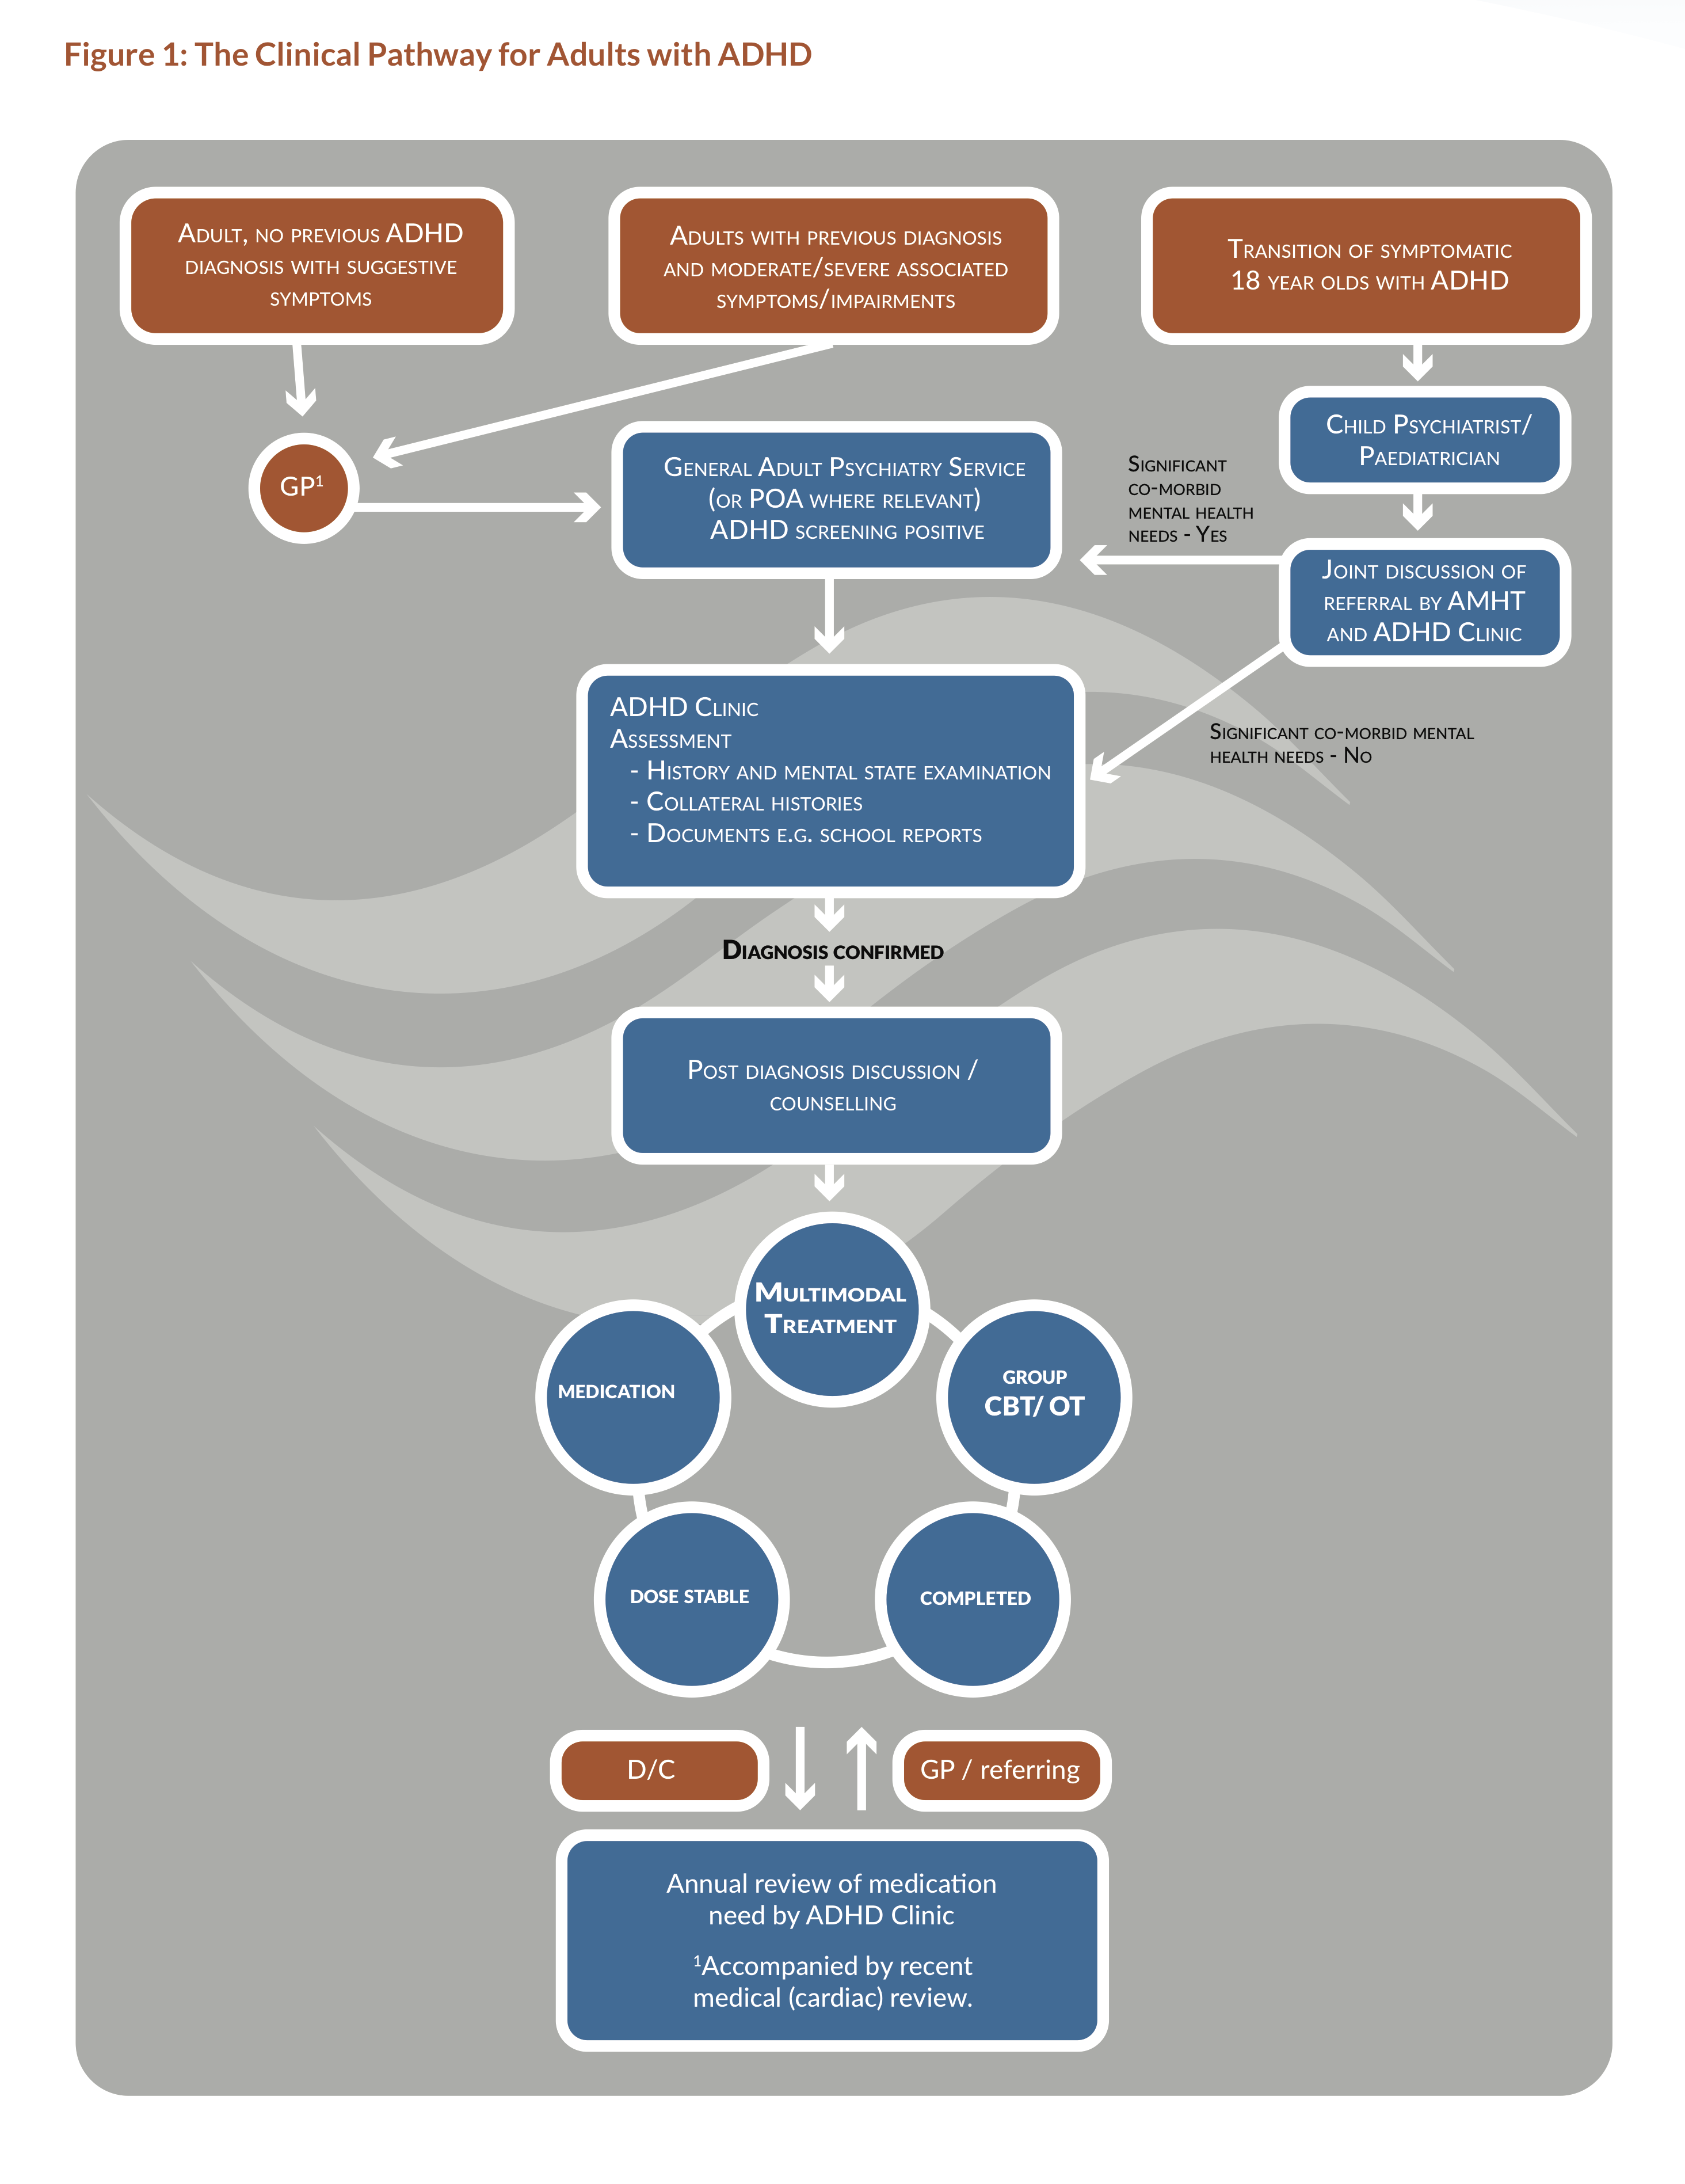 Adult ADHD Clinical Pathway diagram